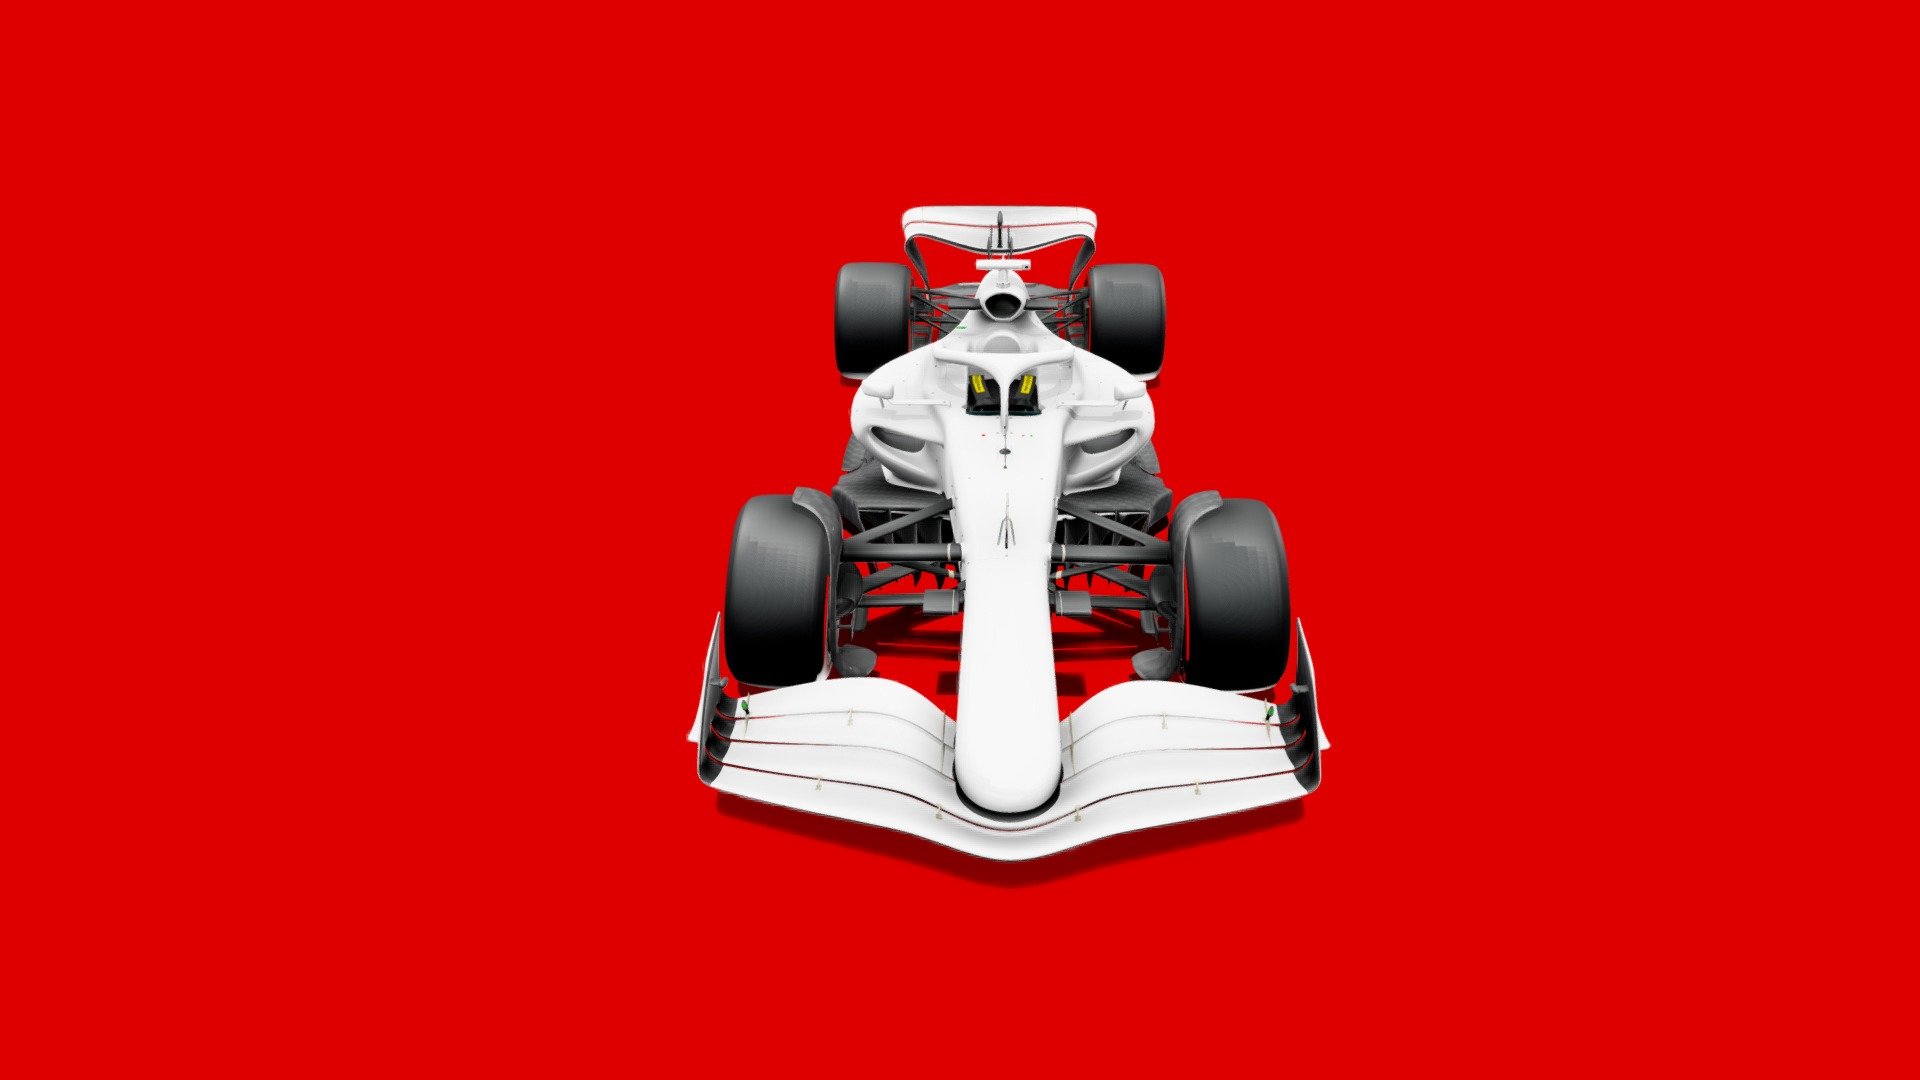 The German marque are two years away from even entering F1, but are already having to defend against rumours that they may opt to pull the plug on their planned entry to the sport.

Audi will enter partnership with the Sauber team, currently known as Alfa Romeo – the Hinwil-based squad will revert to their Sauber name for the 2024 and ’25 seasons before being rebranded as Audi from 2026 in what has been a long-awaited arrival of the VW Group in F1 3d model